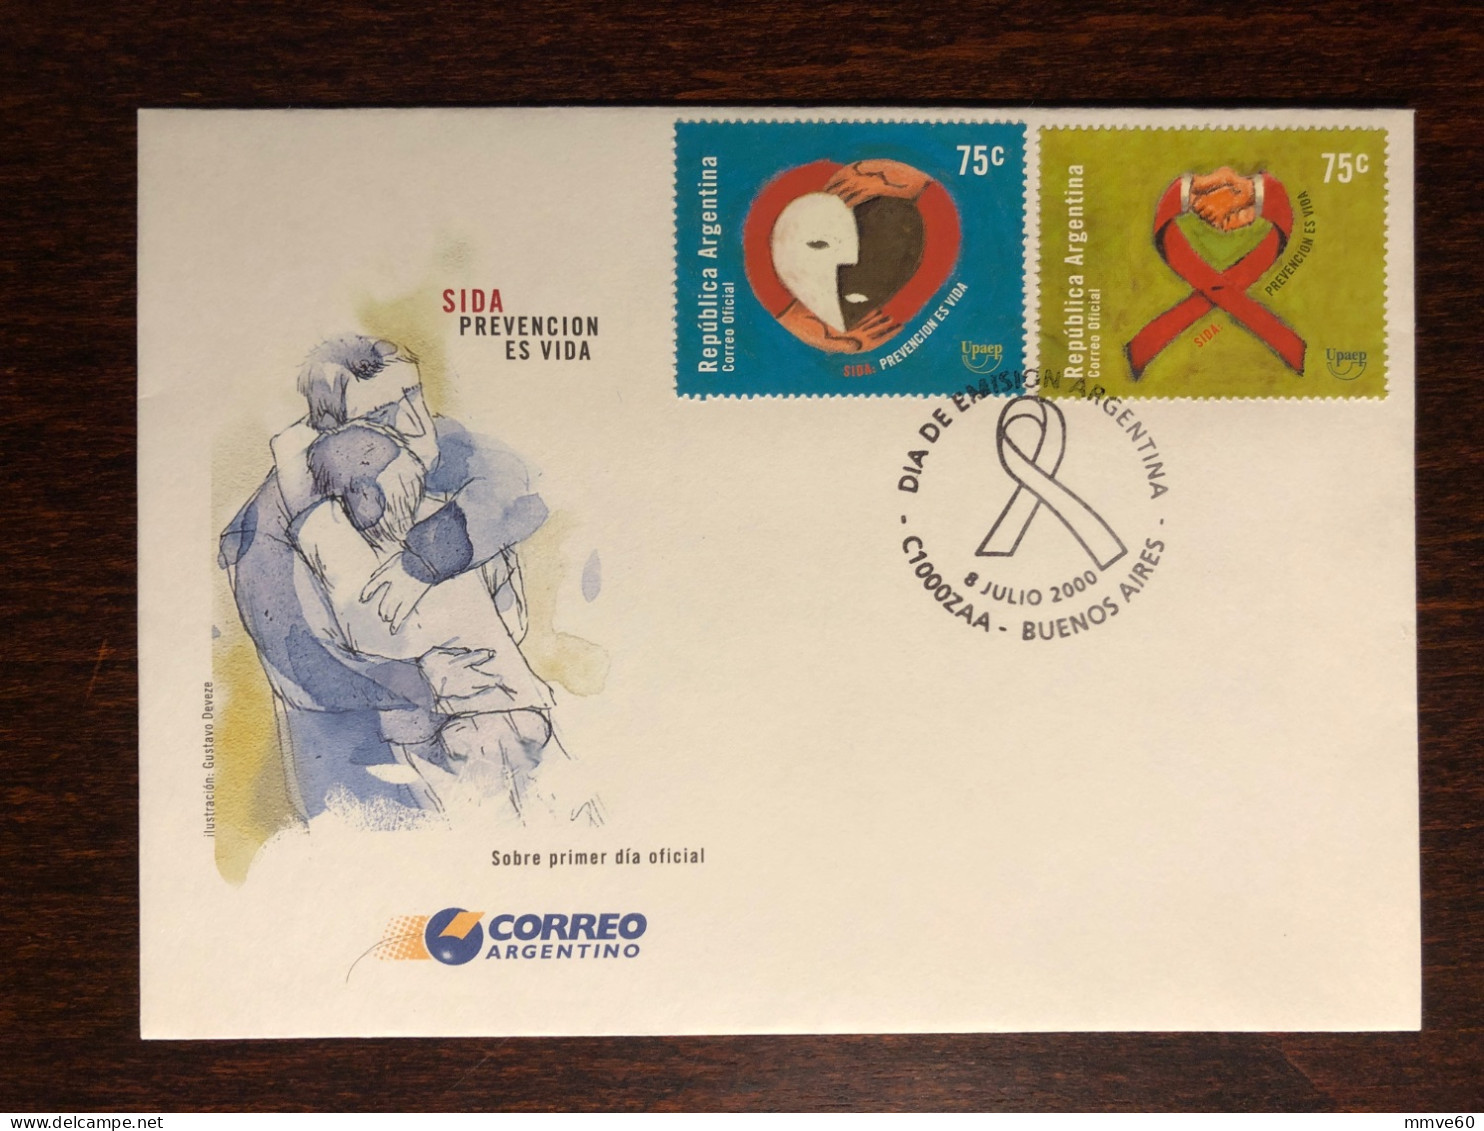 ARGENTINA FDC COVER 2000 YEAR AIDS SIDA HEALTH MEDICINE STAMPS - FDC